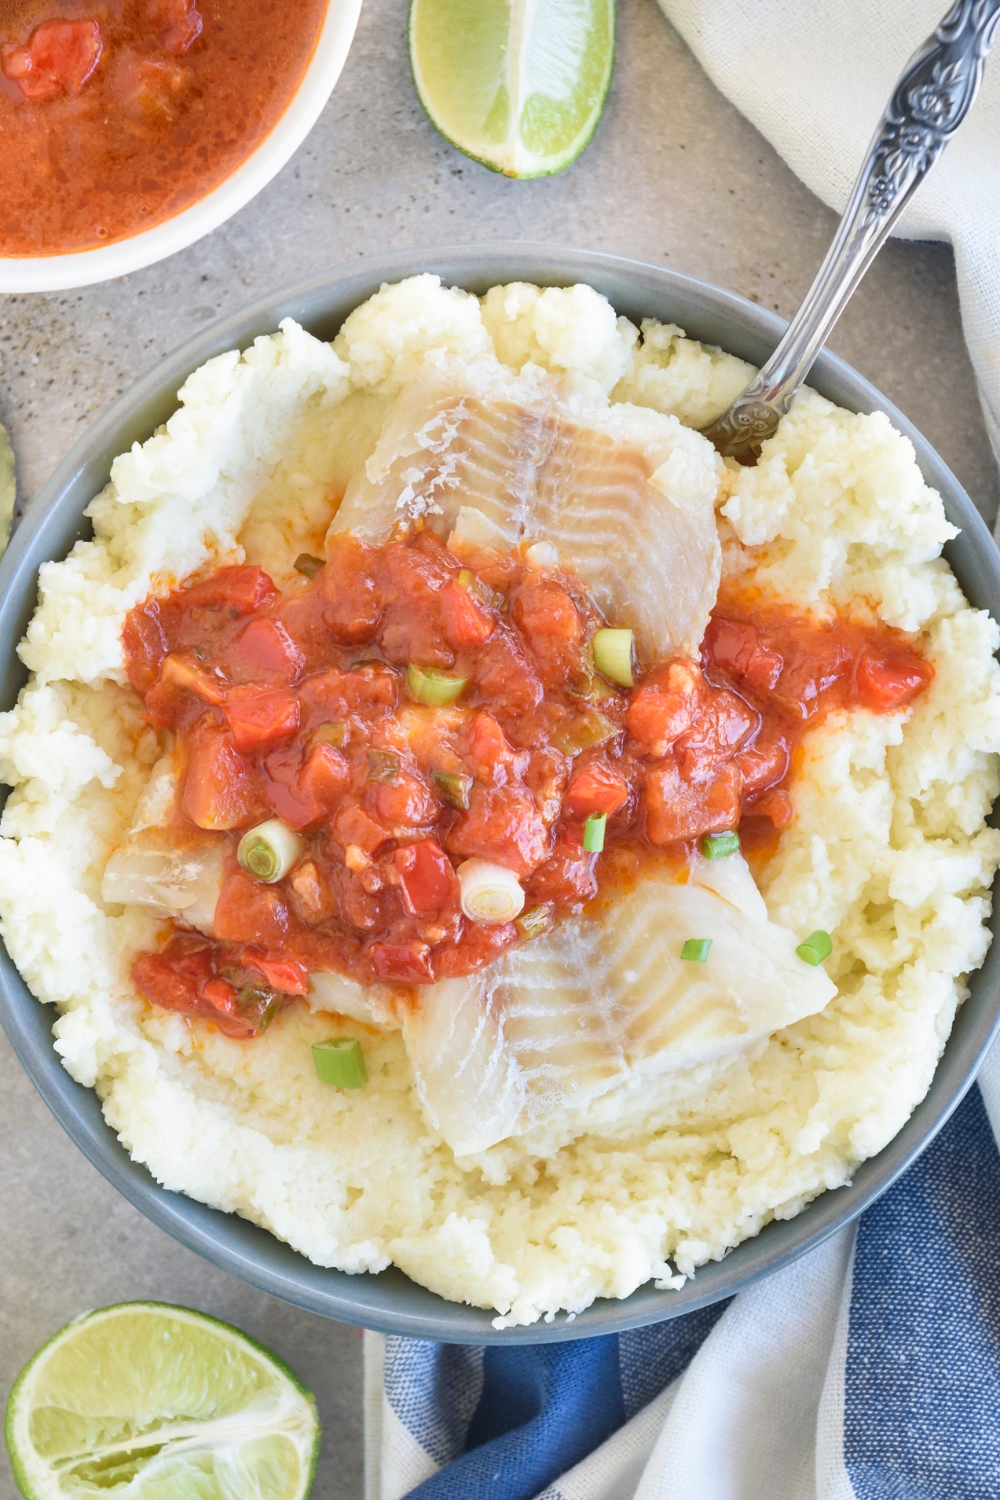 A silver spoon rests in a blue bowl full of fish and grits. The fish and grits are topped with tomato sauce.